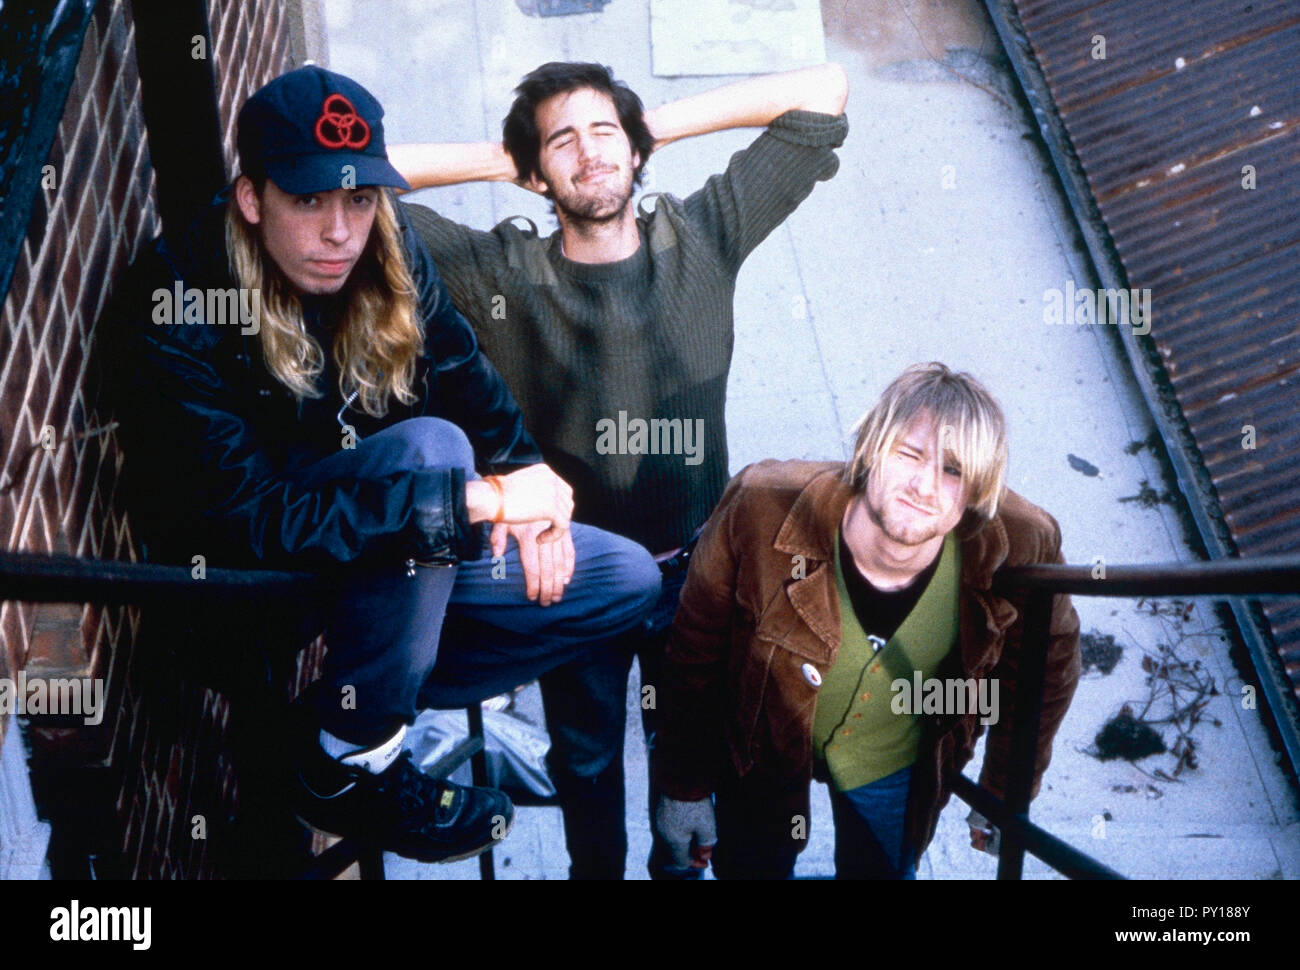 London, UK. Nirvana was an American rock band that was formed by singer/guitarist Kurt Cobain (Died in 1994) and bassist Krist Novoselic in Aberdeen, Washington in 1987. In picture: Kurt Cobain, Dave Grohl and Krist Novoselic. Circa 1990s. Ref: LMK11-40003LD-310712 Credit: Landmark / MediaPunch Stock Photo